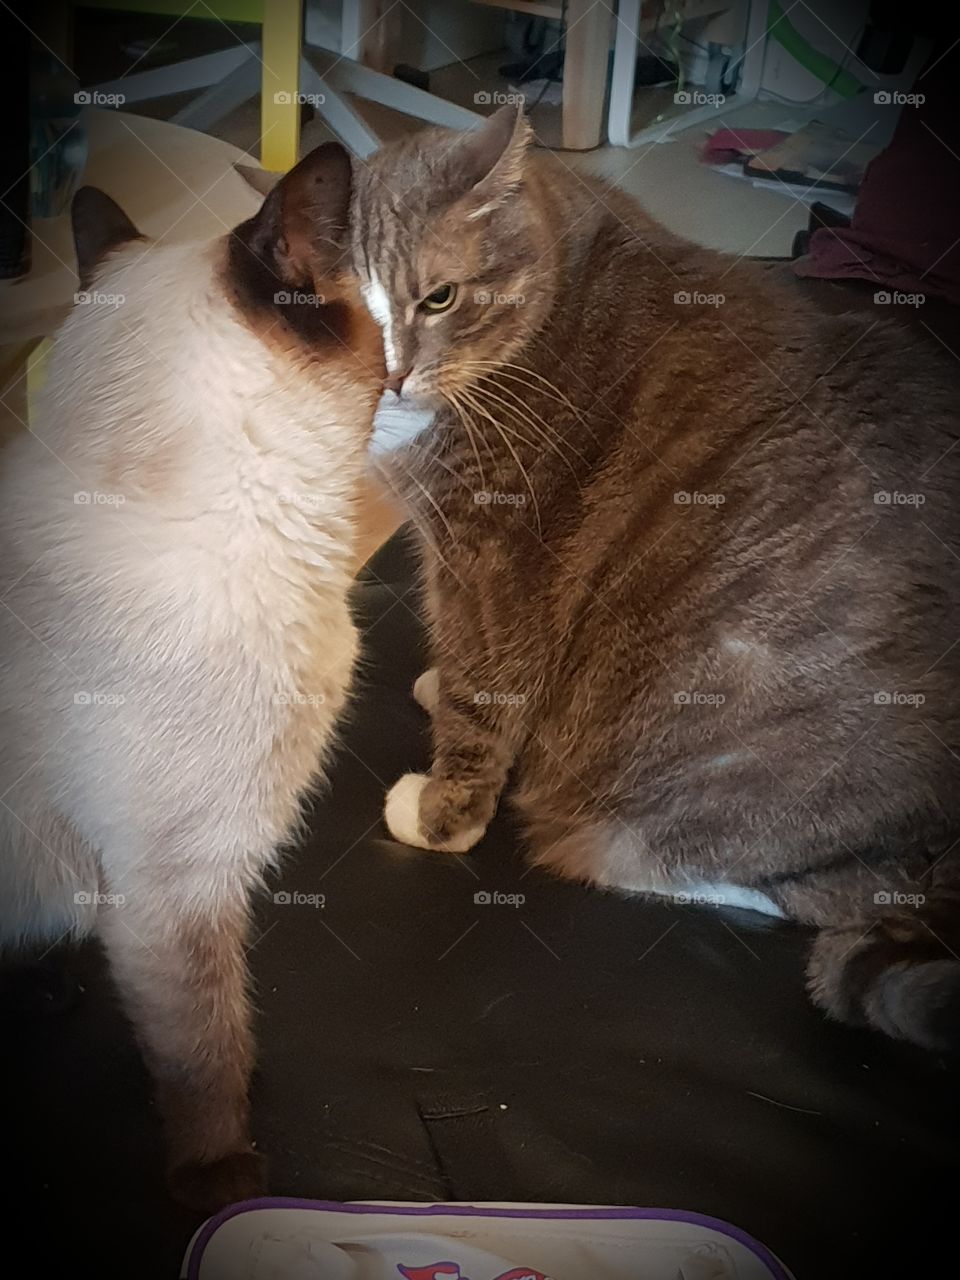 Cats looking mad at each other